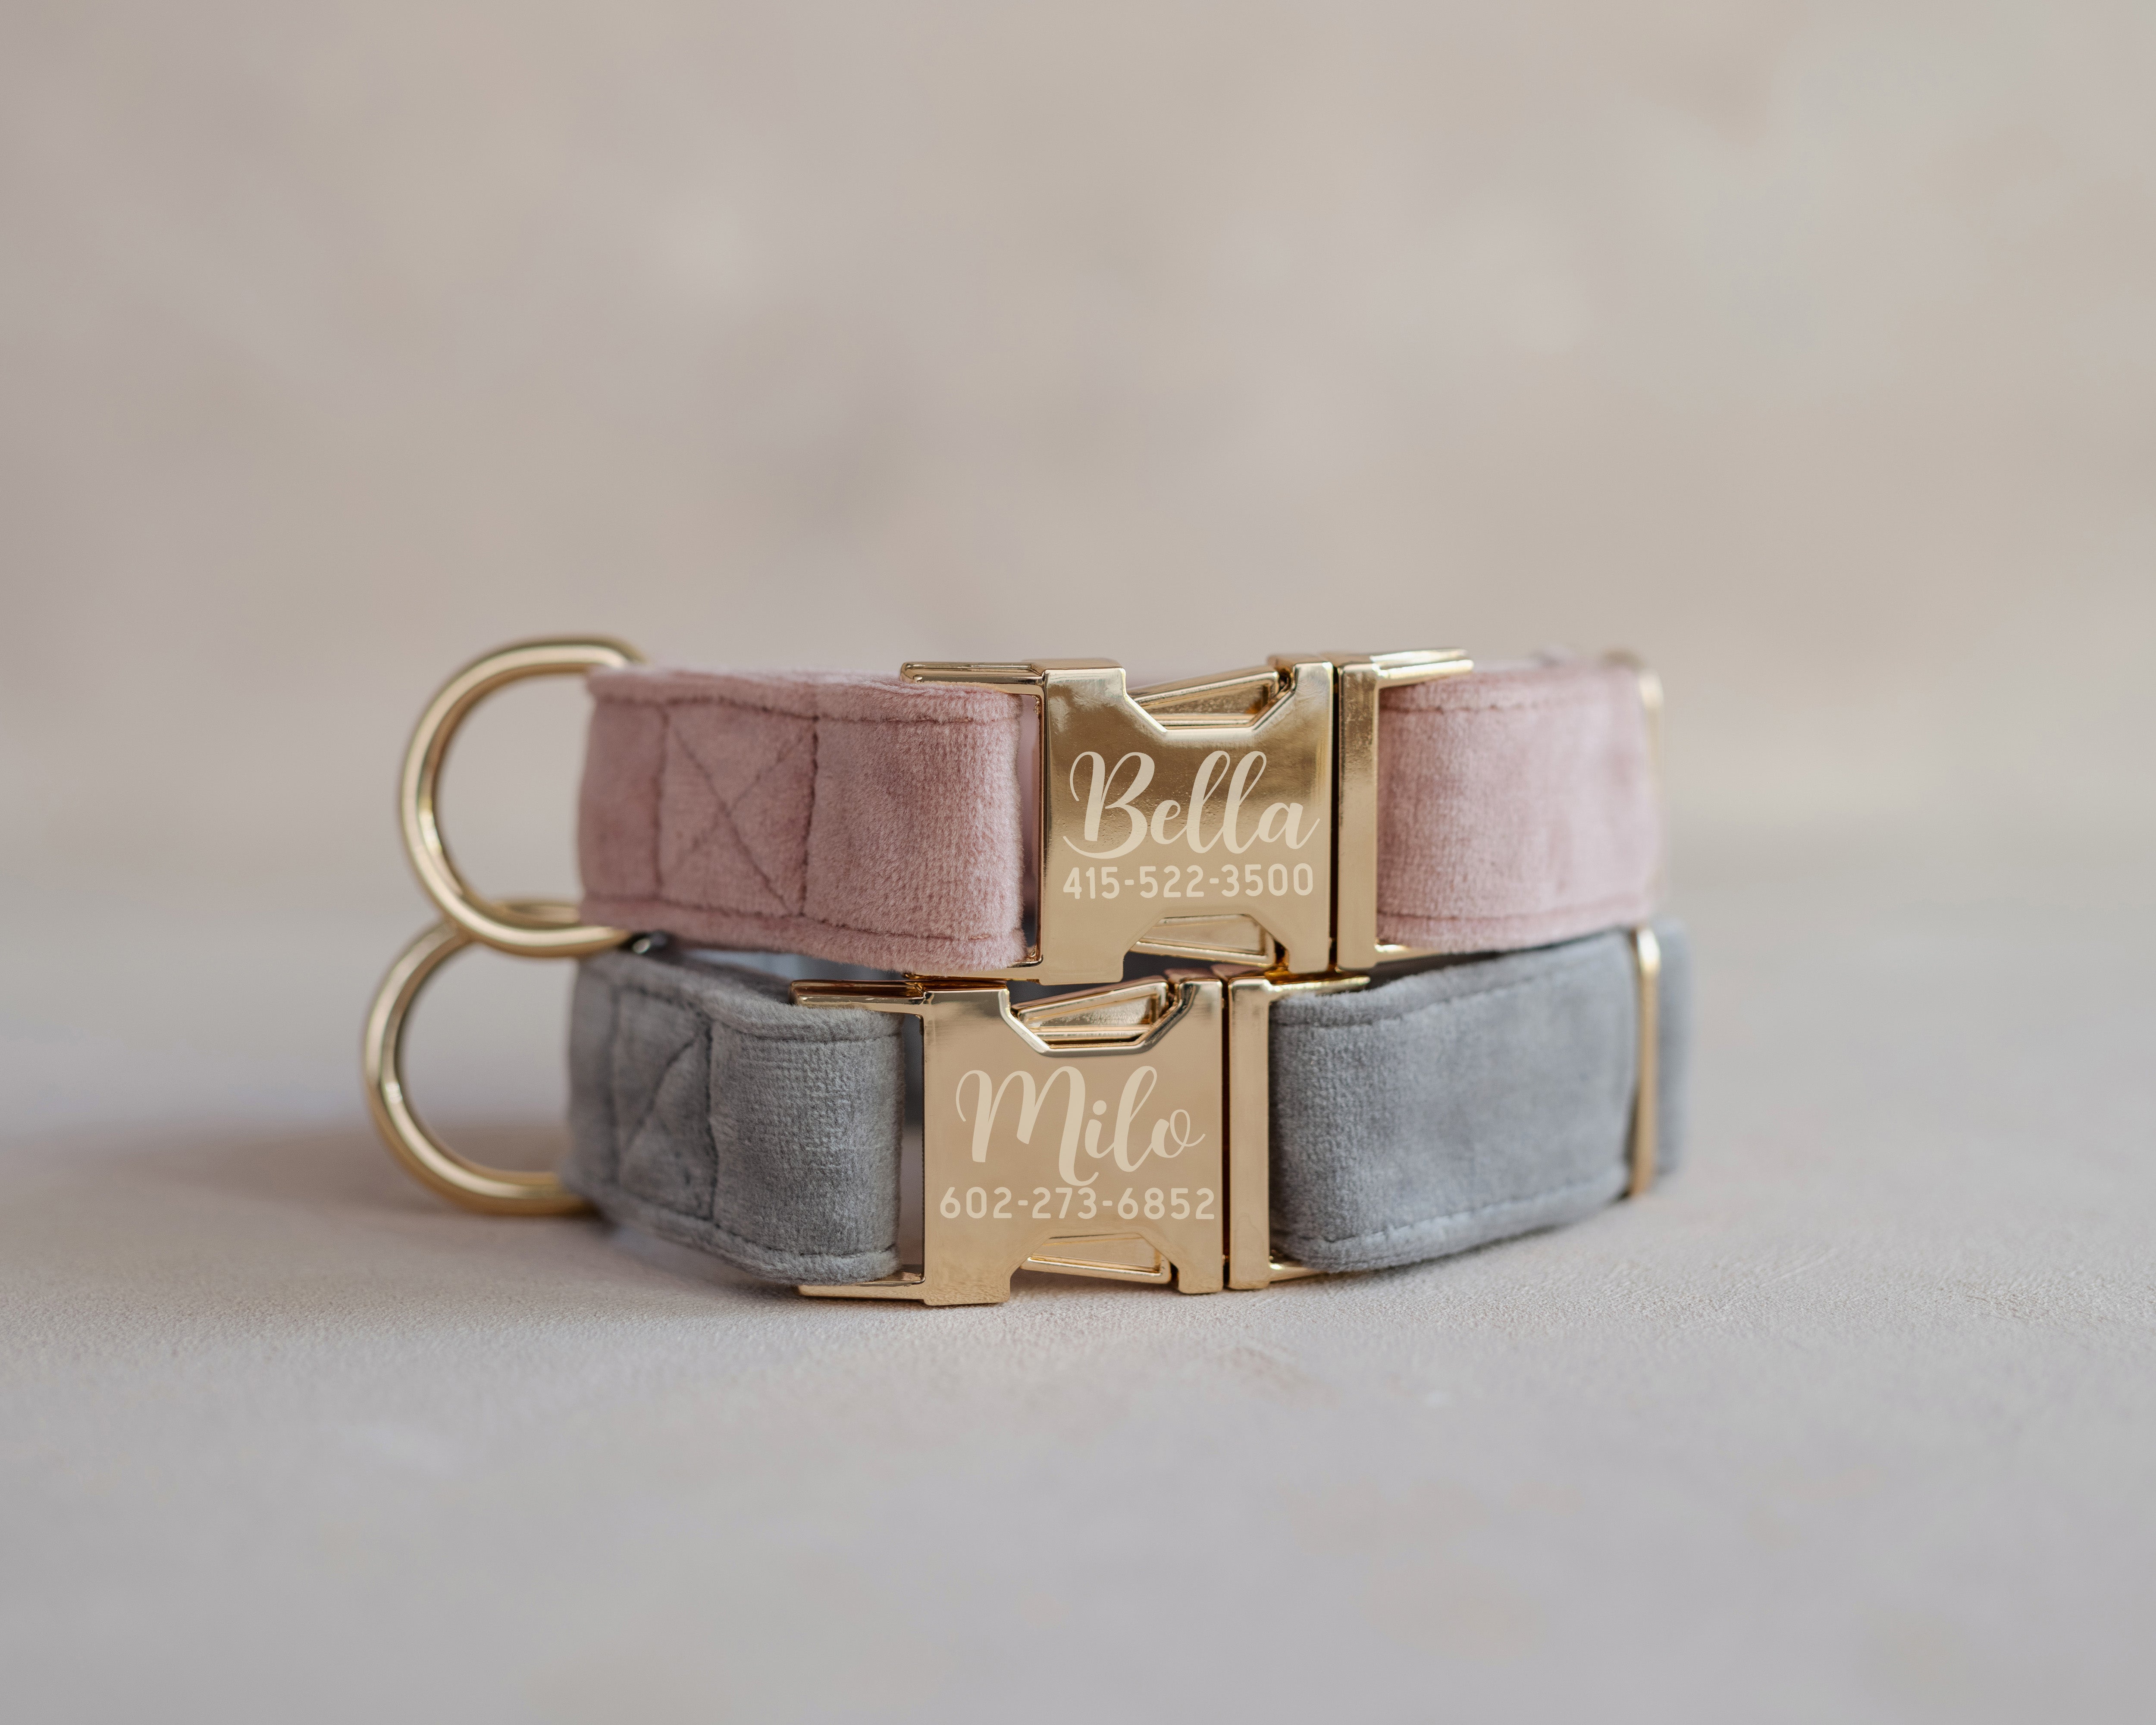 Velvet Dog Collar with fast release buckle